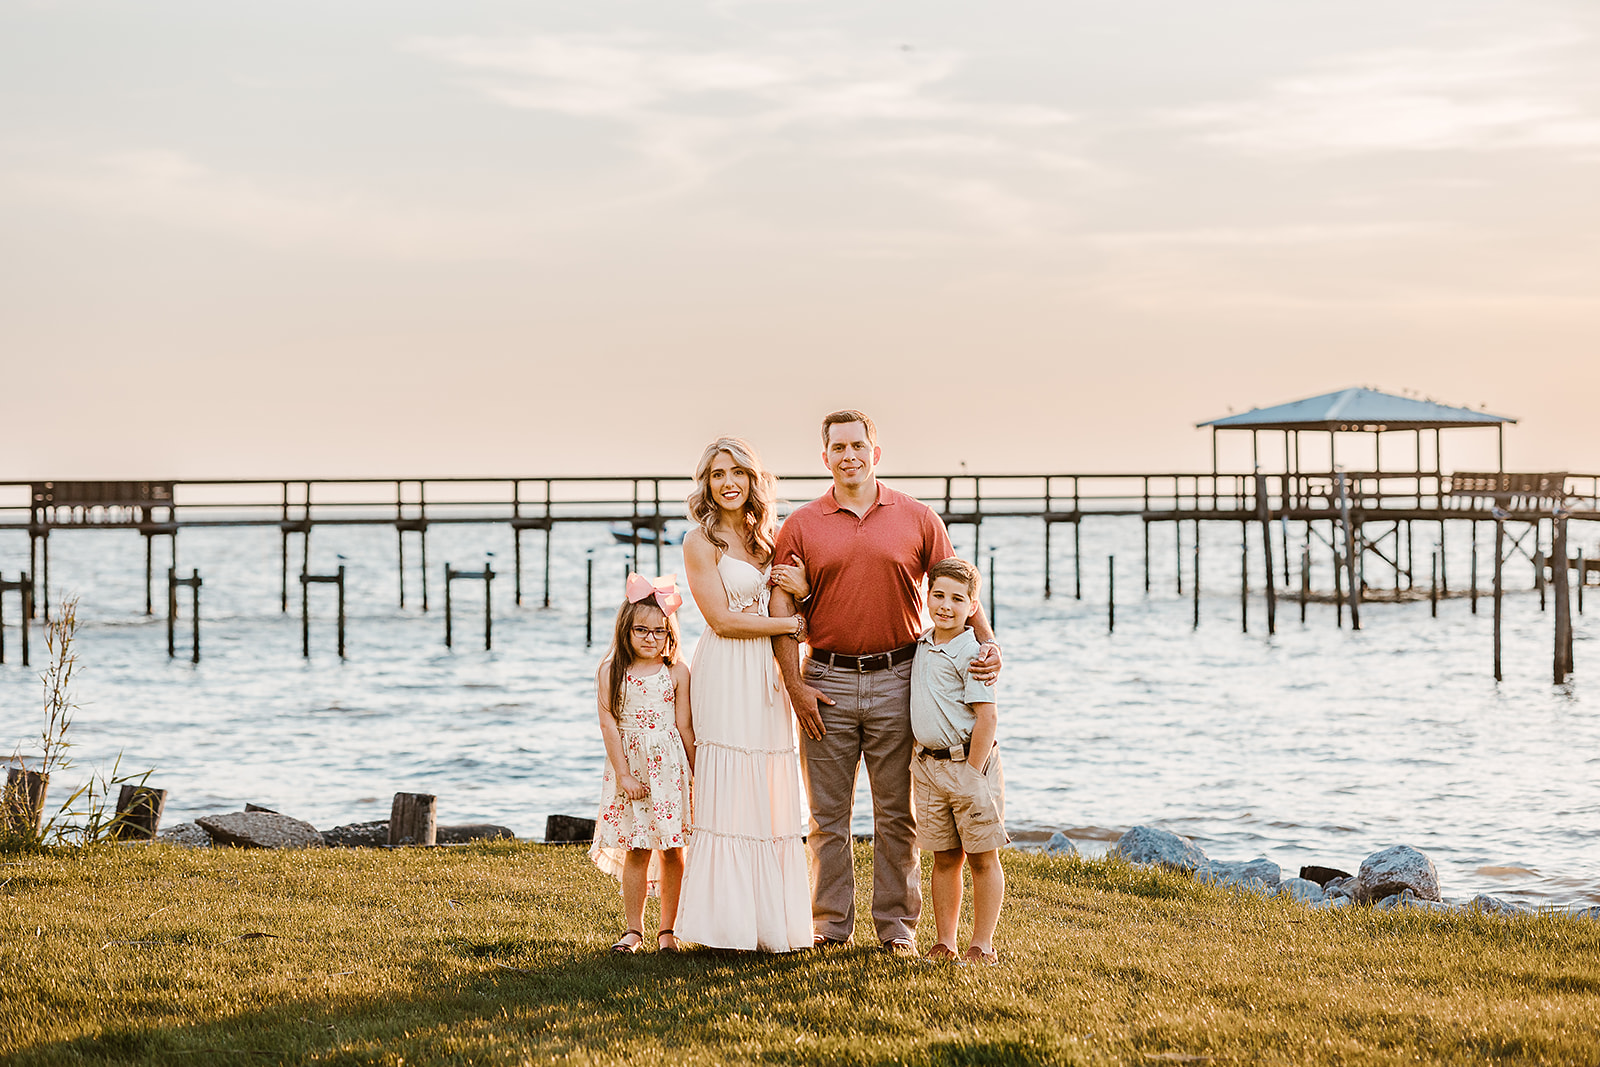 A family photoshoot in downtown Fairhope, AL with The Millers Photo Co